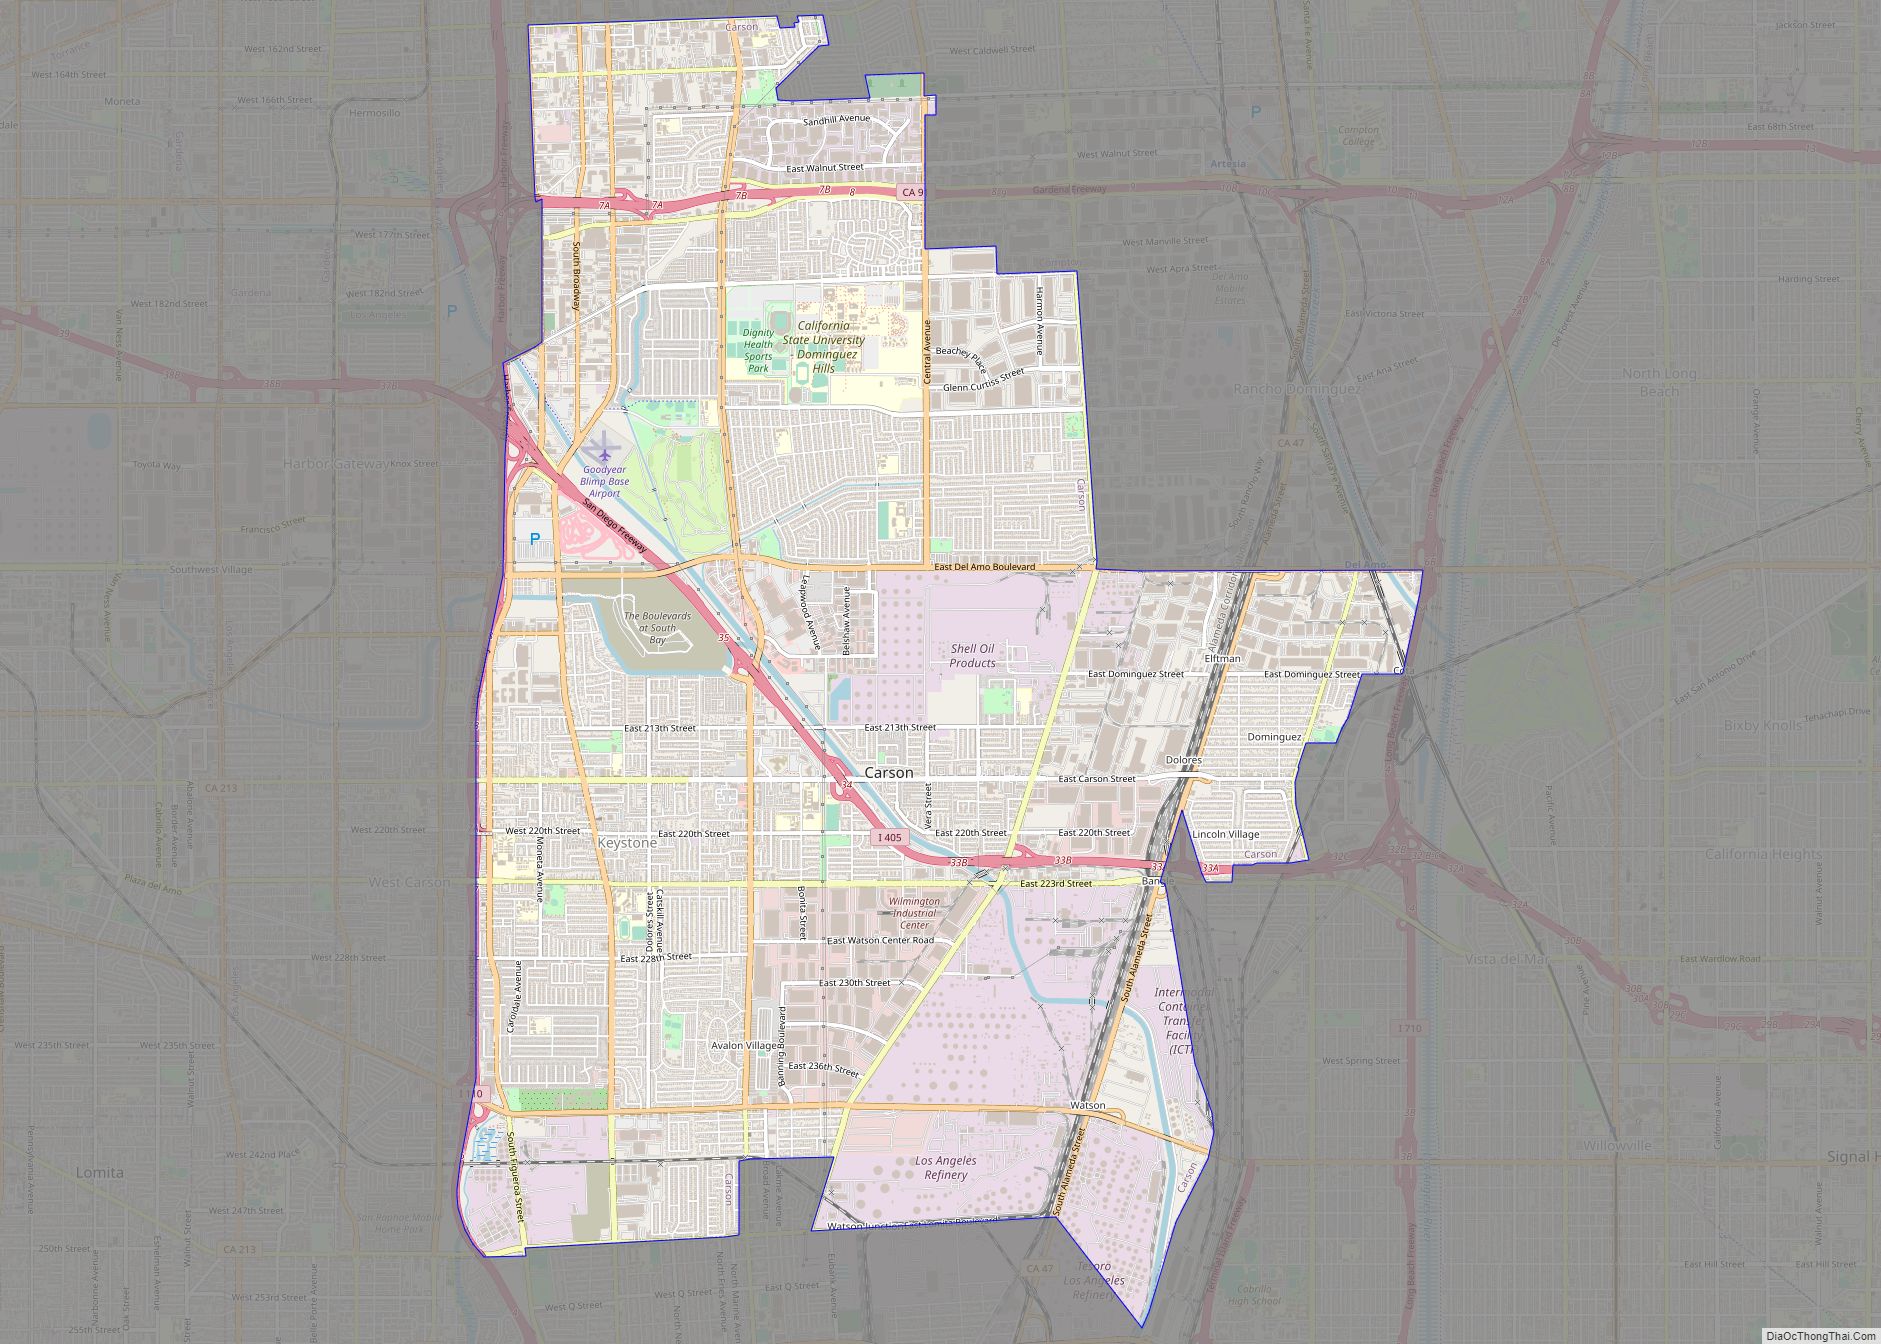 Map of Carson city